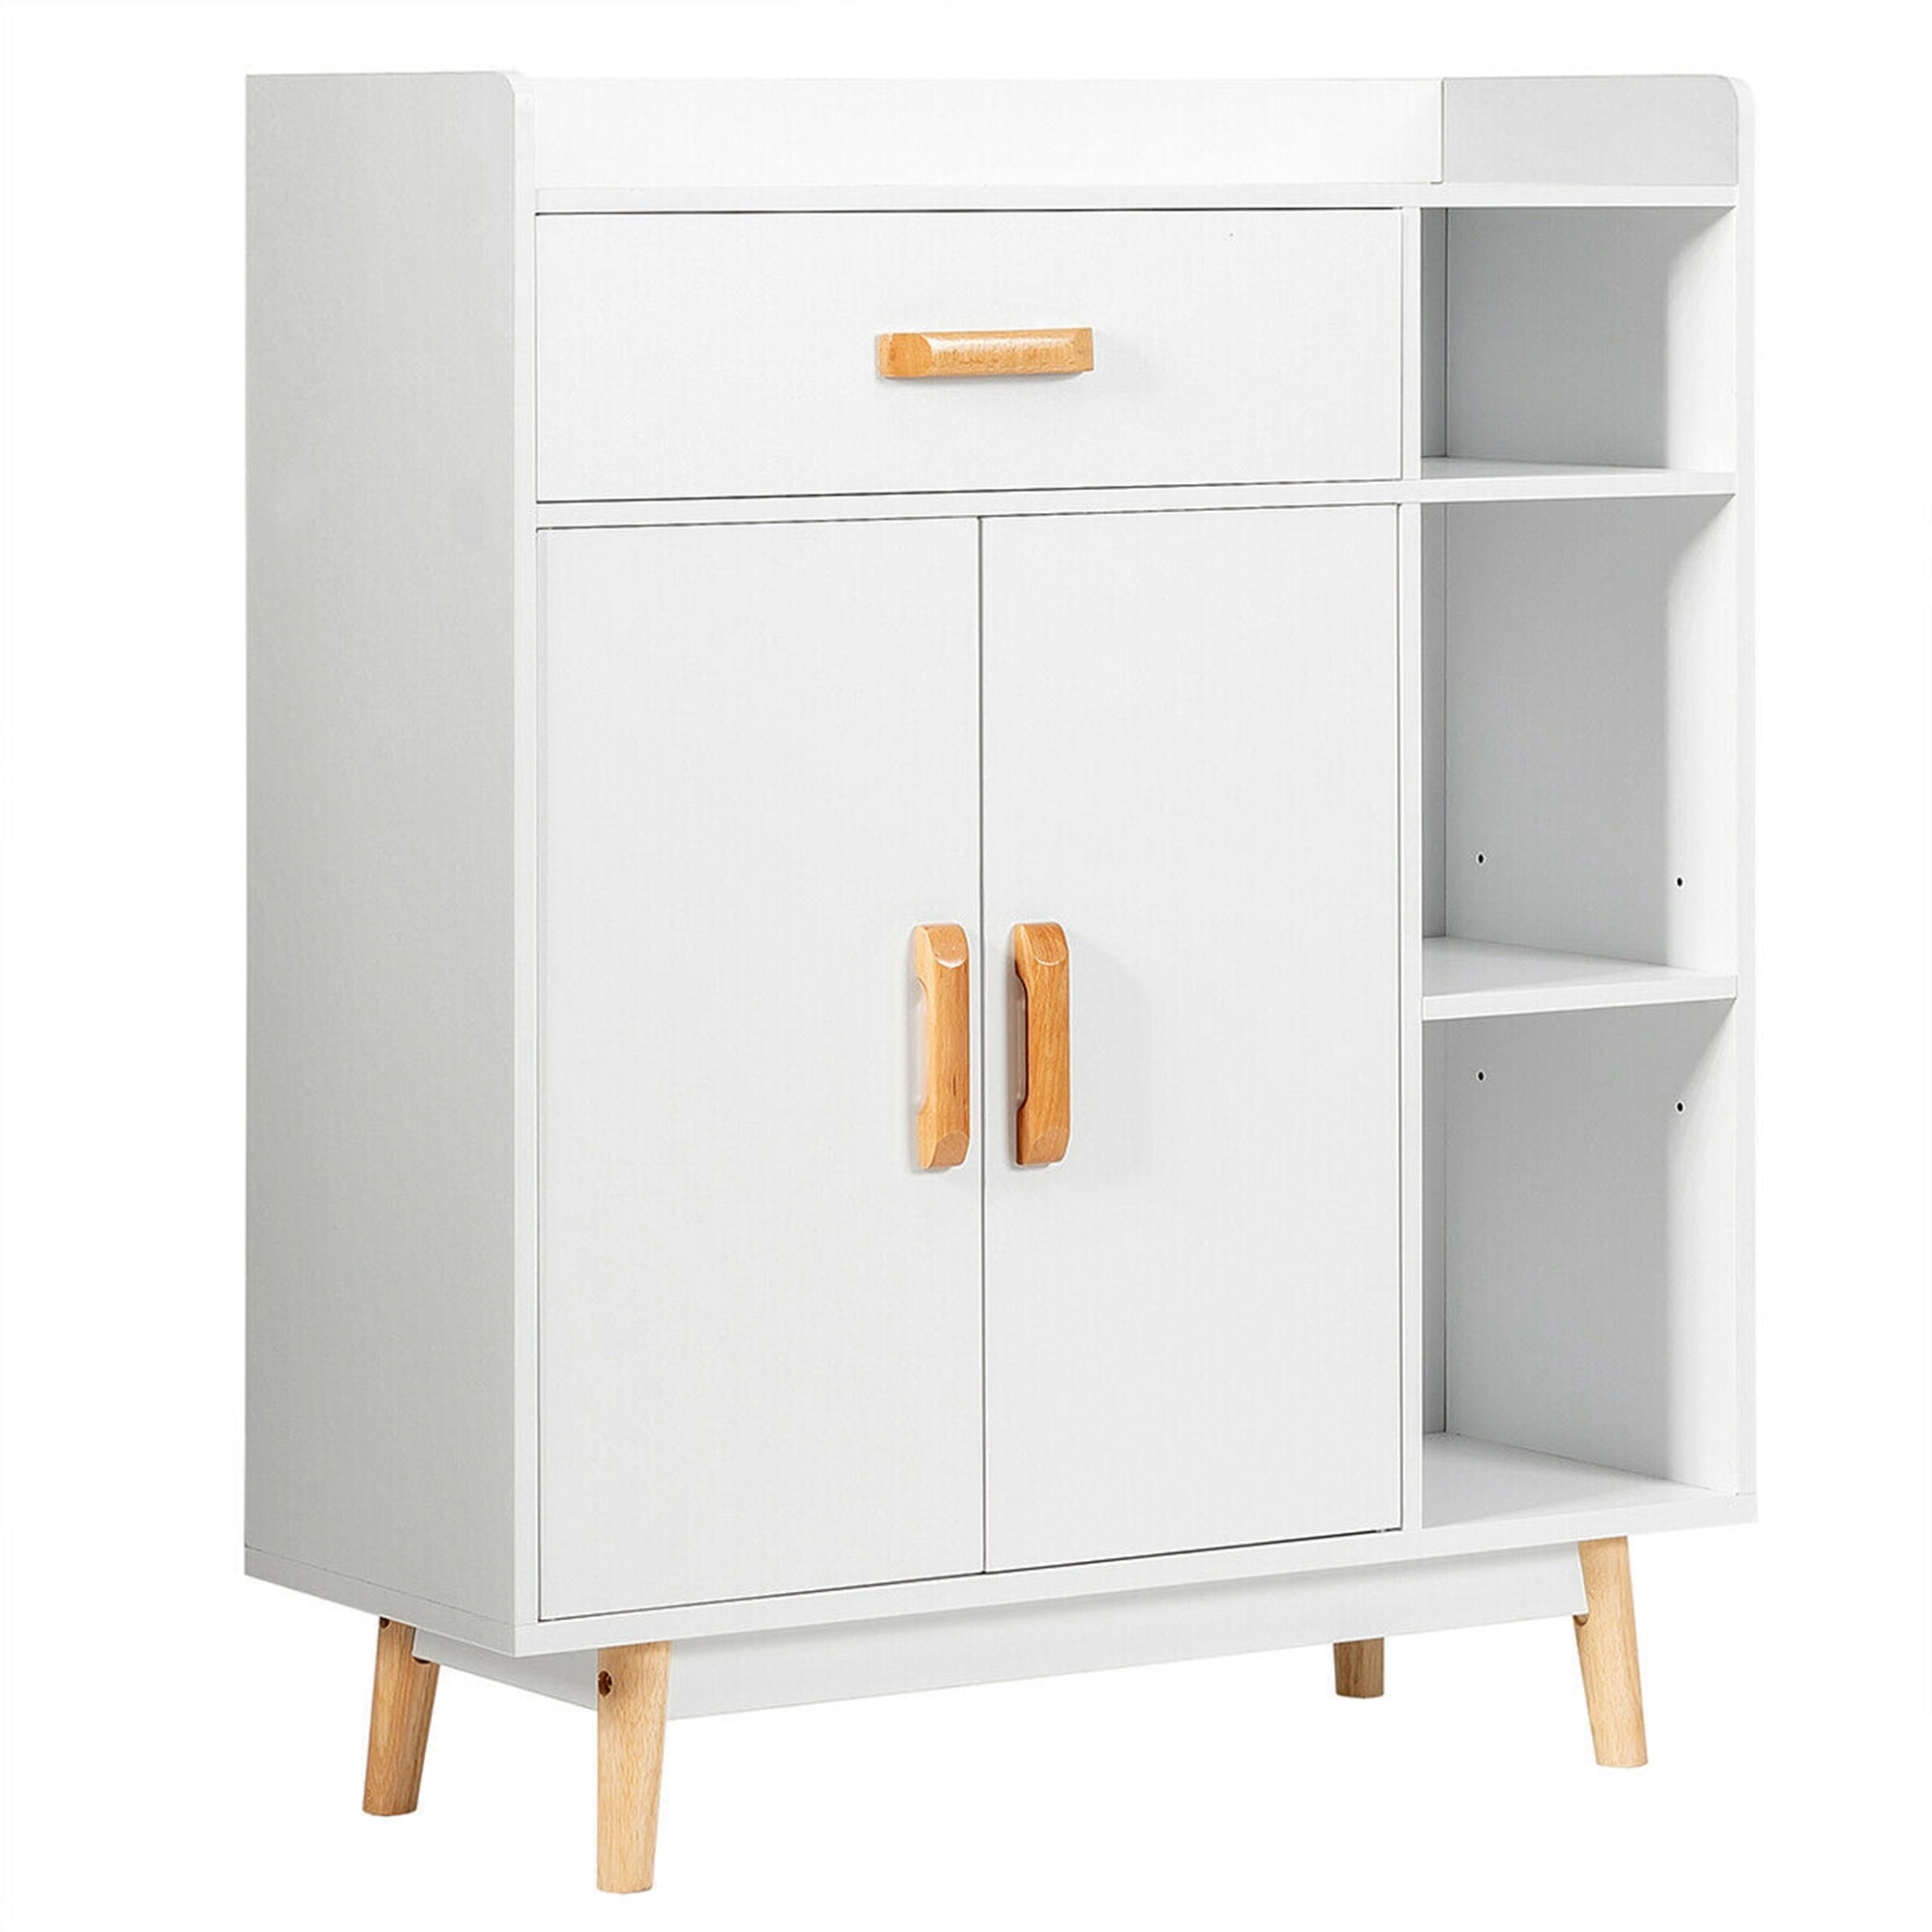 Gymax Floor Storage Cabinet Free Standing Cupboard Chest with 1 Drawer